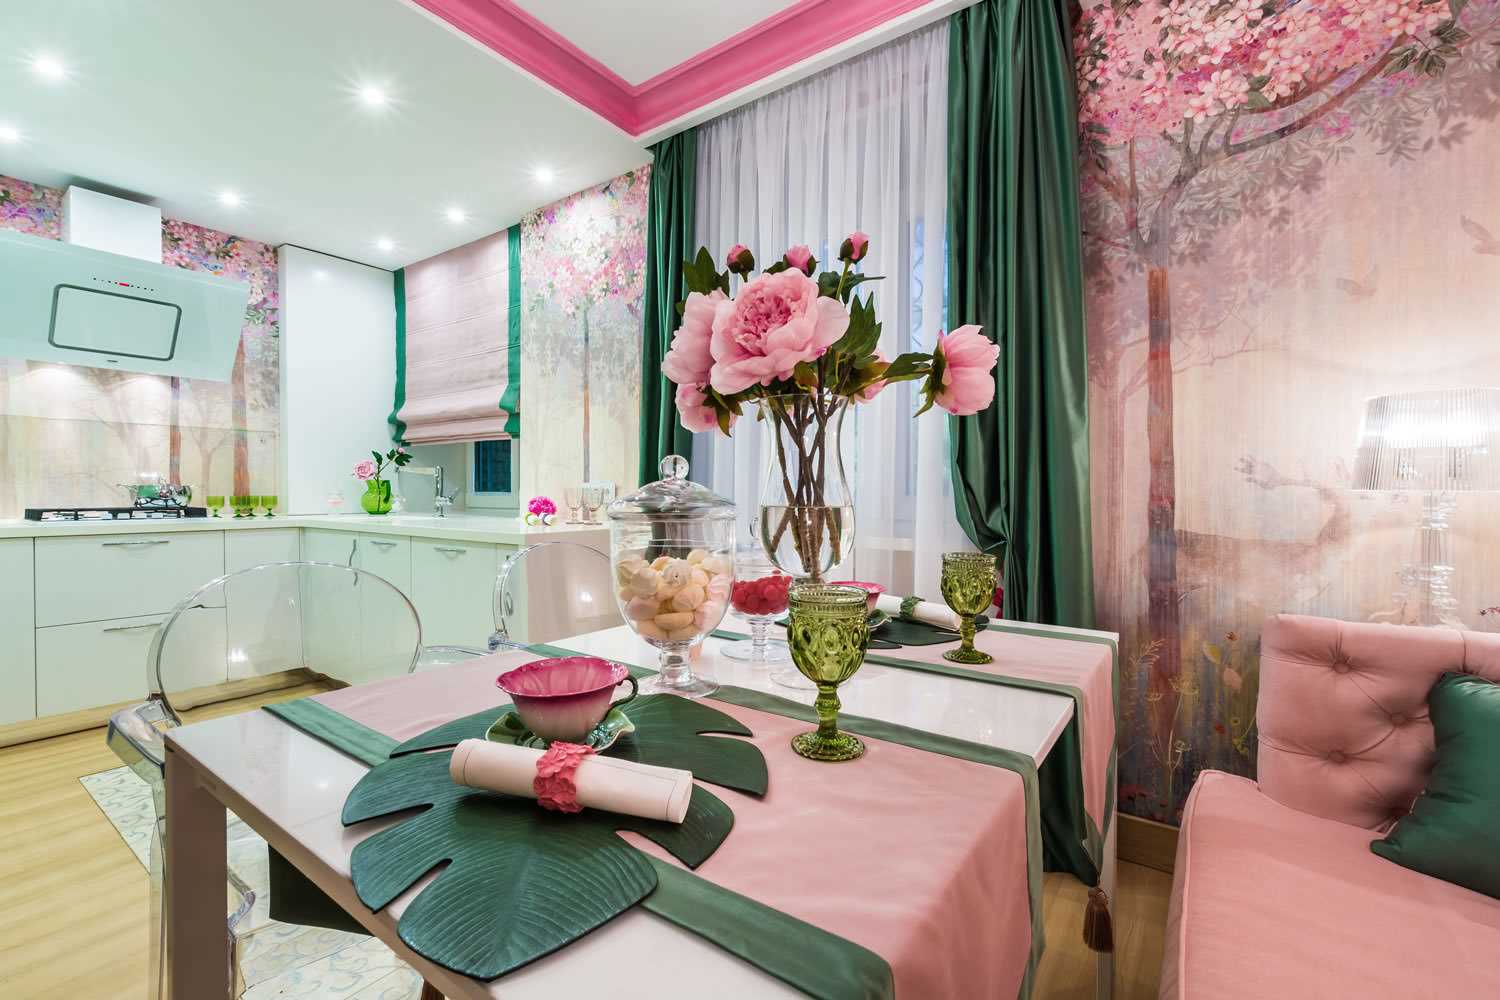 the idea of ​​using pink in an unusual apartment design